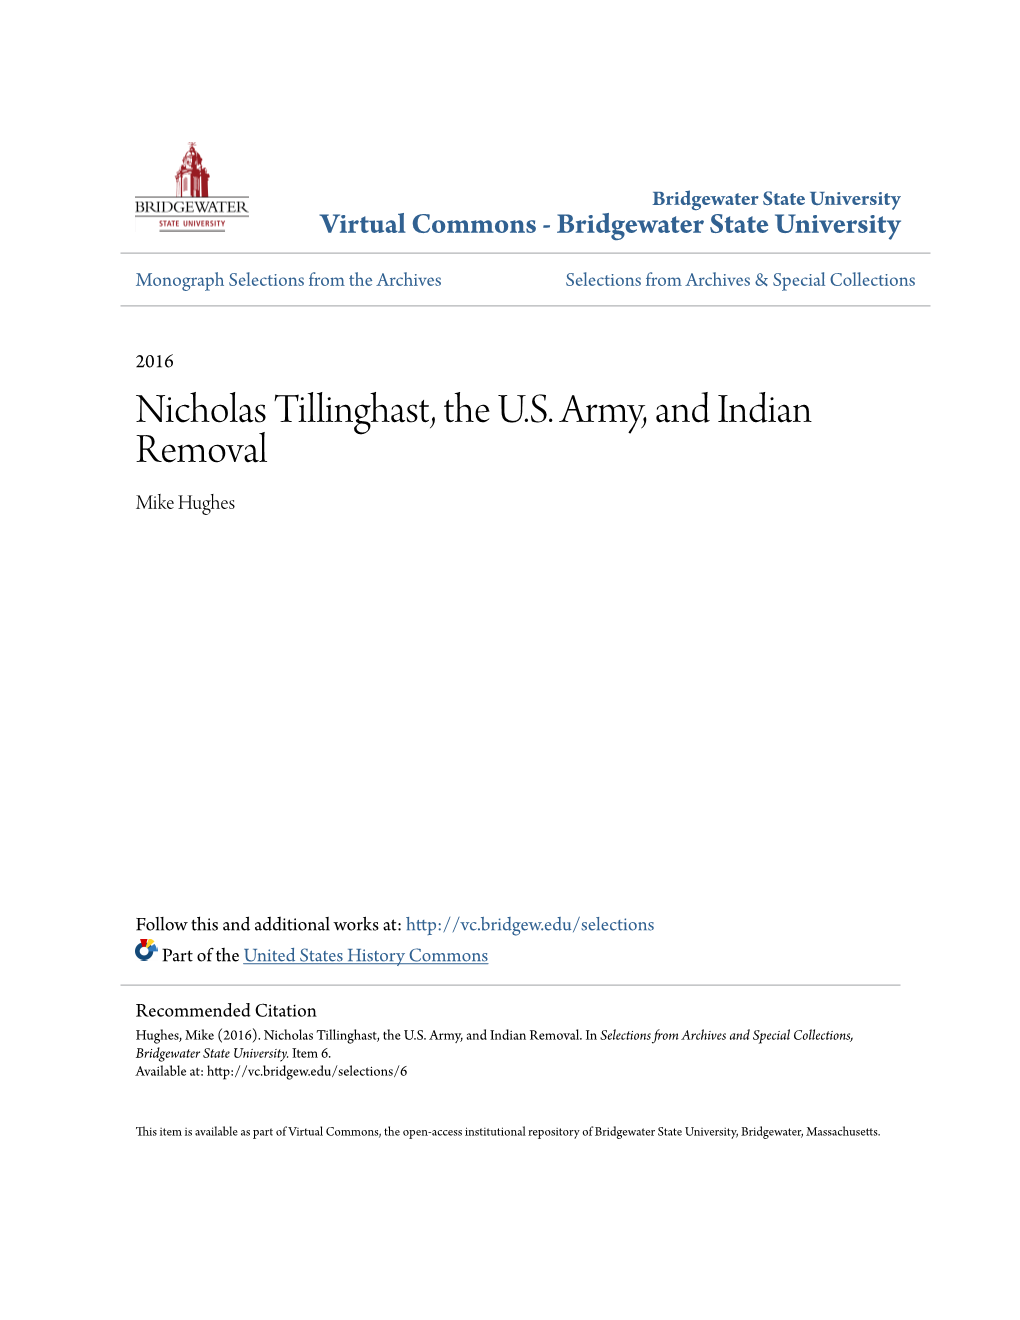 Nicholas Tillinghast, the U.S. Army, and Indian Removal Mike Hughes